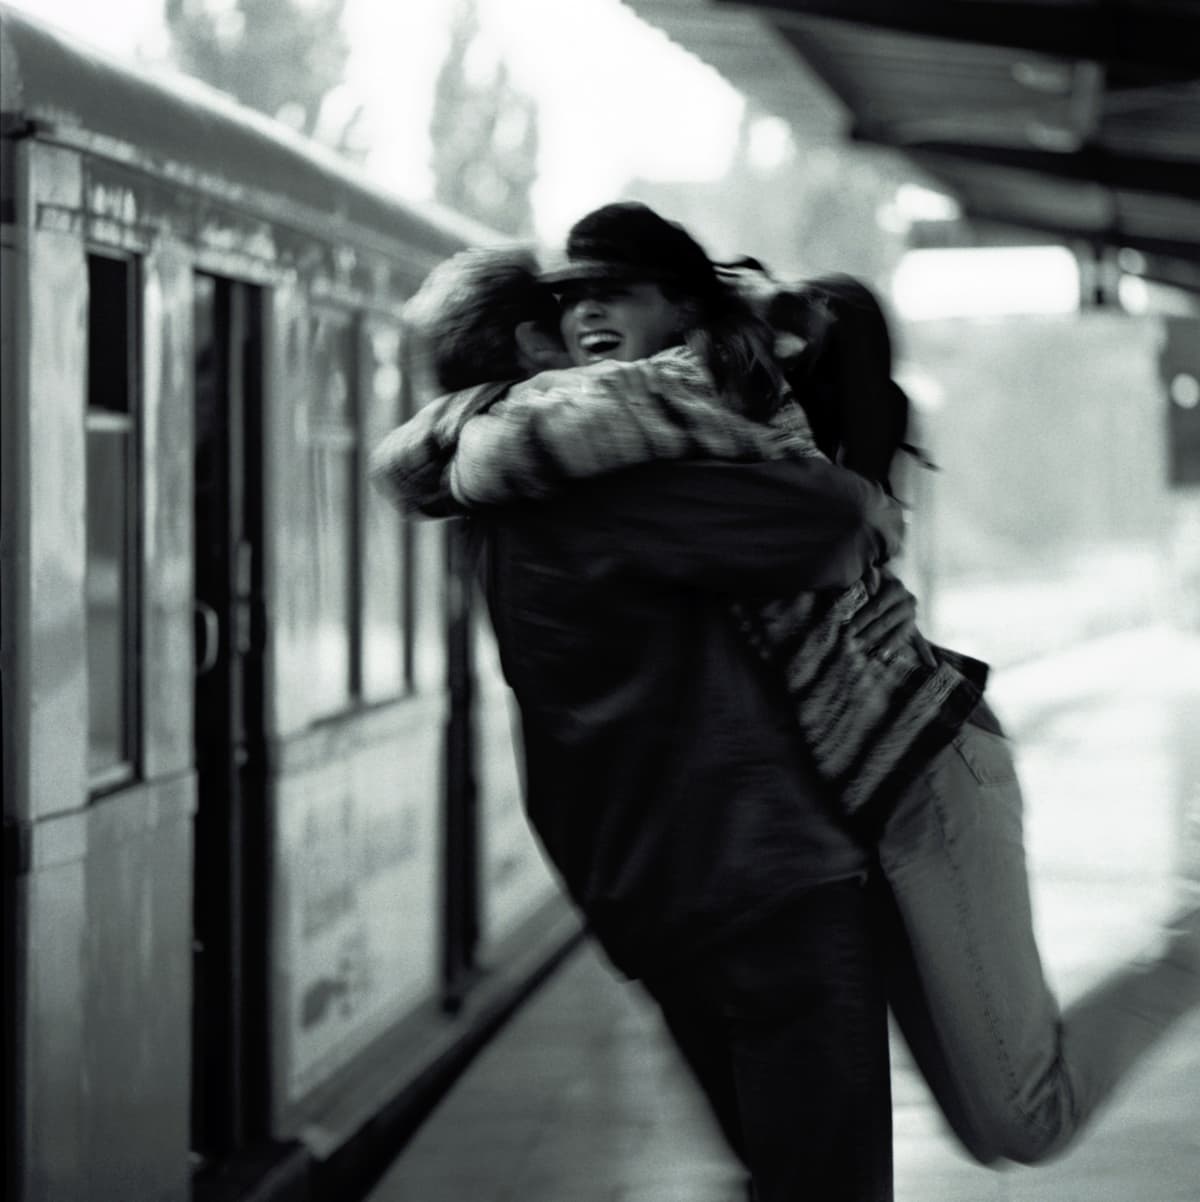 Couple embracing at train station, man lifting woman off the ground